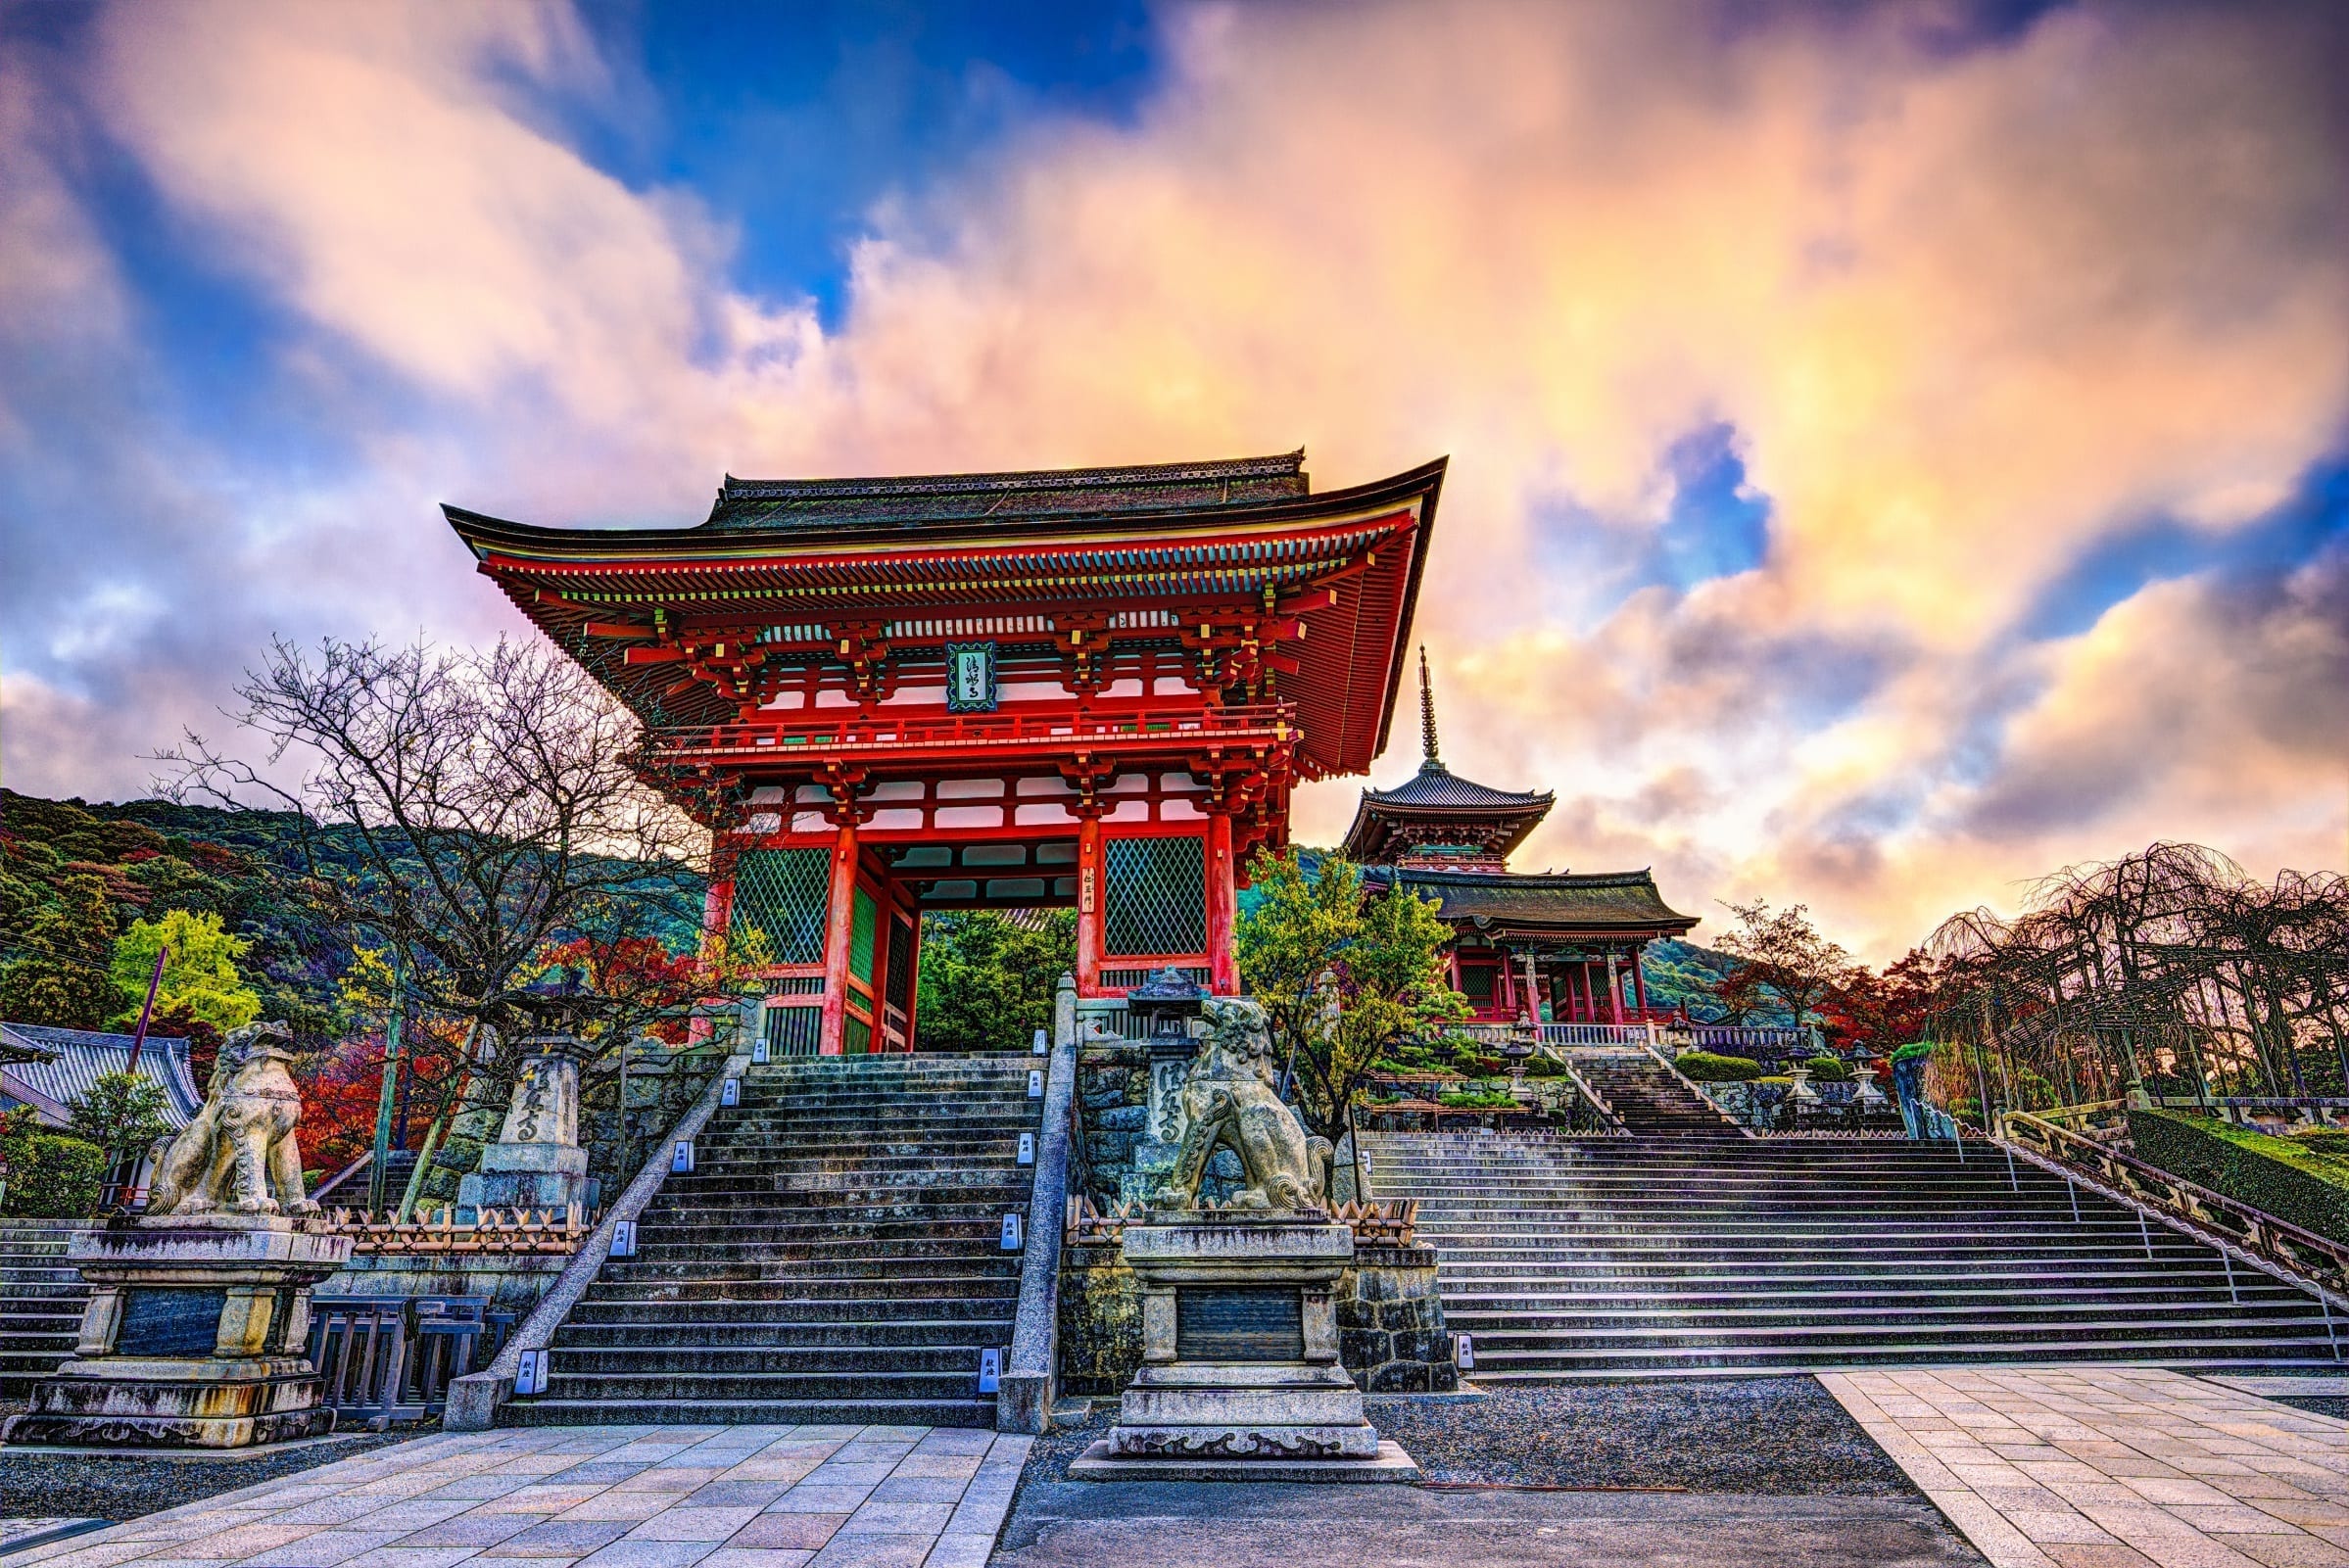 Kizomizu temple is included in Japan tours offered by Asia Vacation Group.